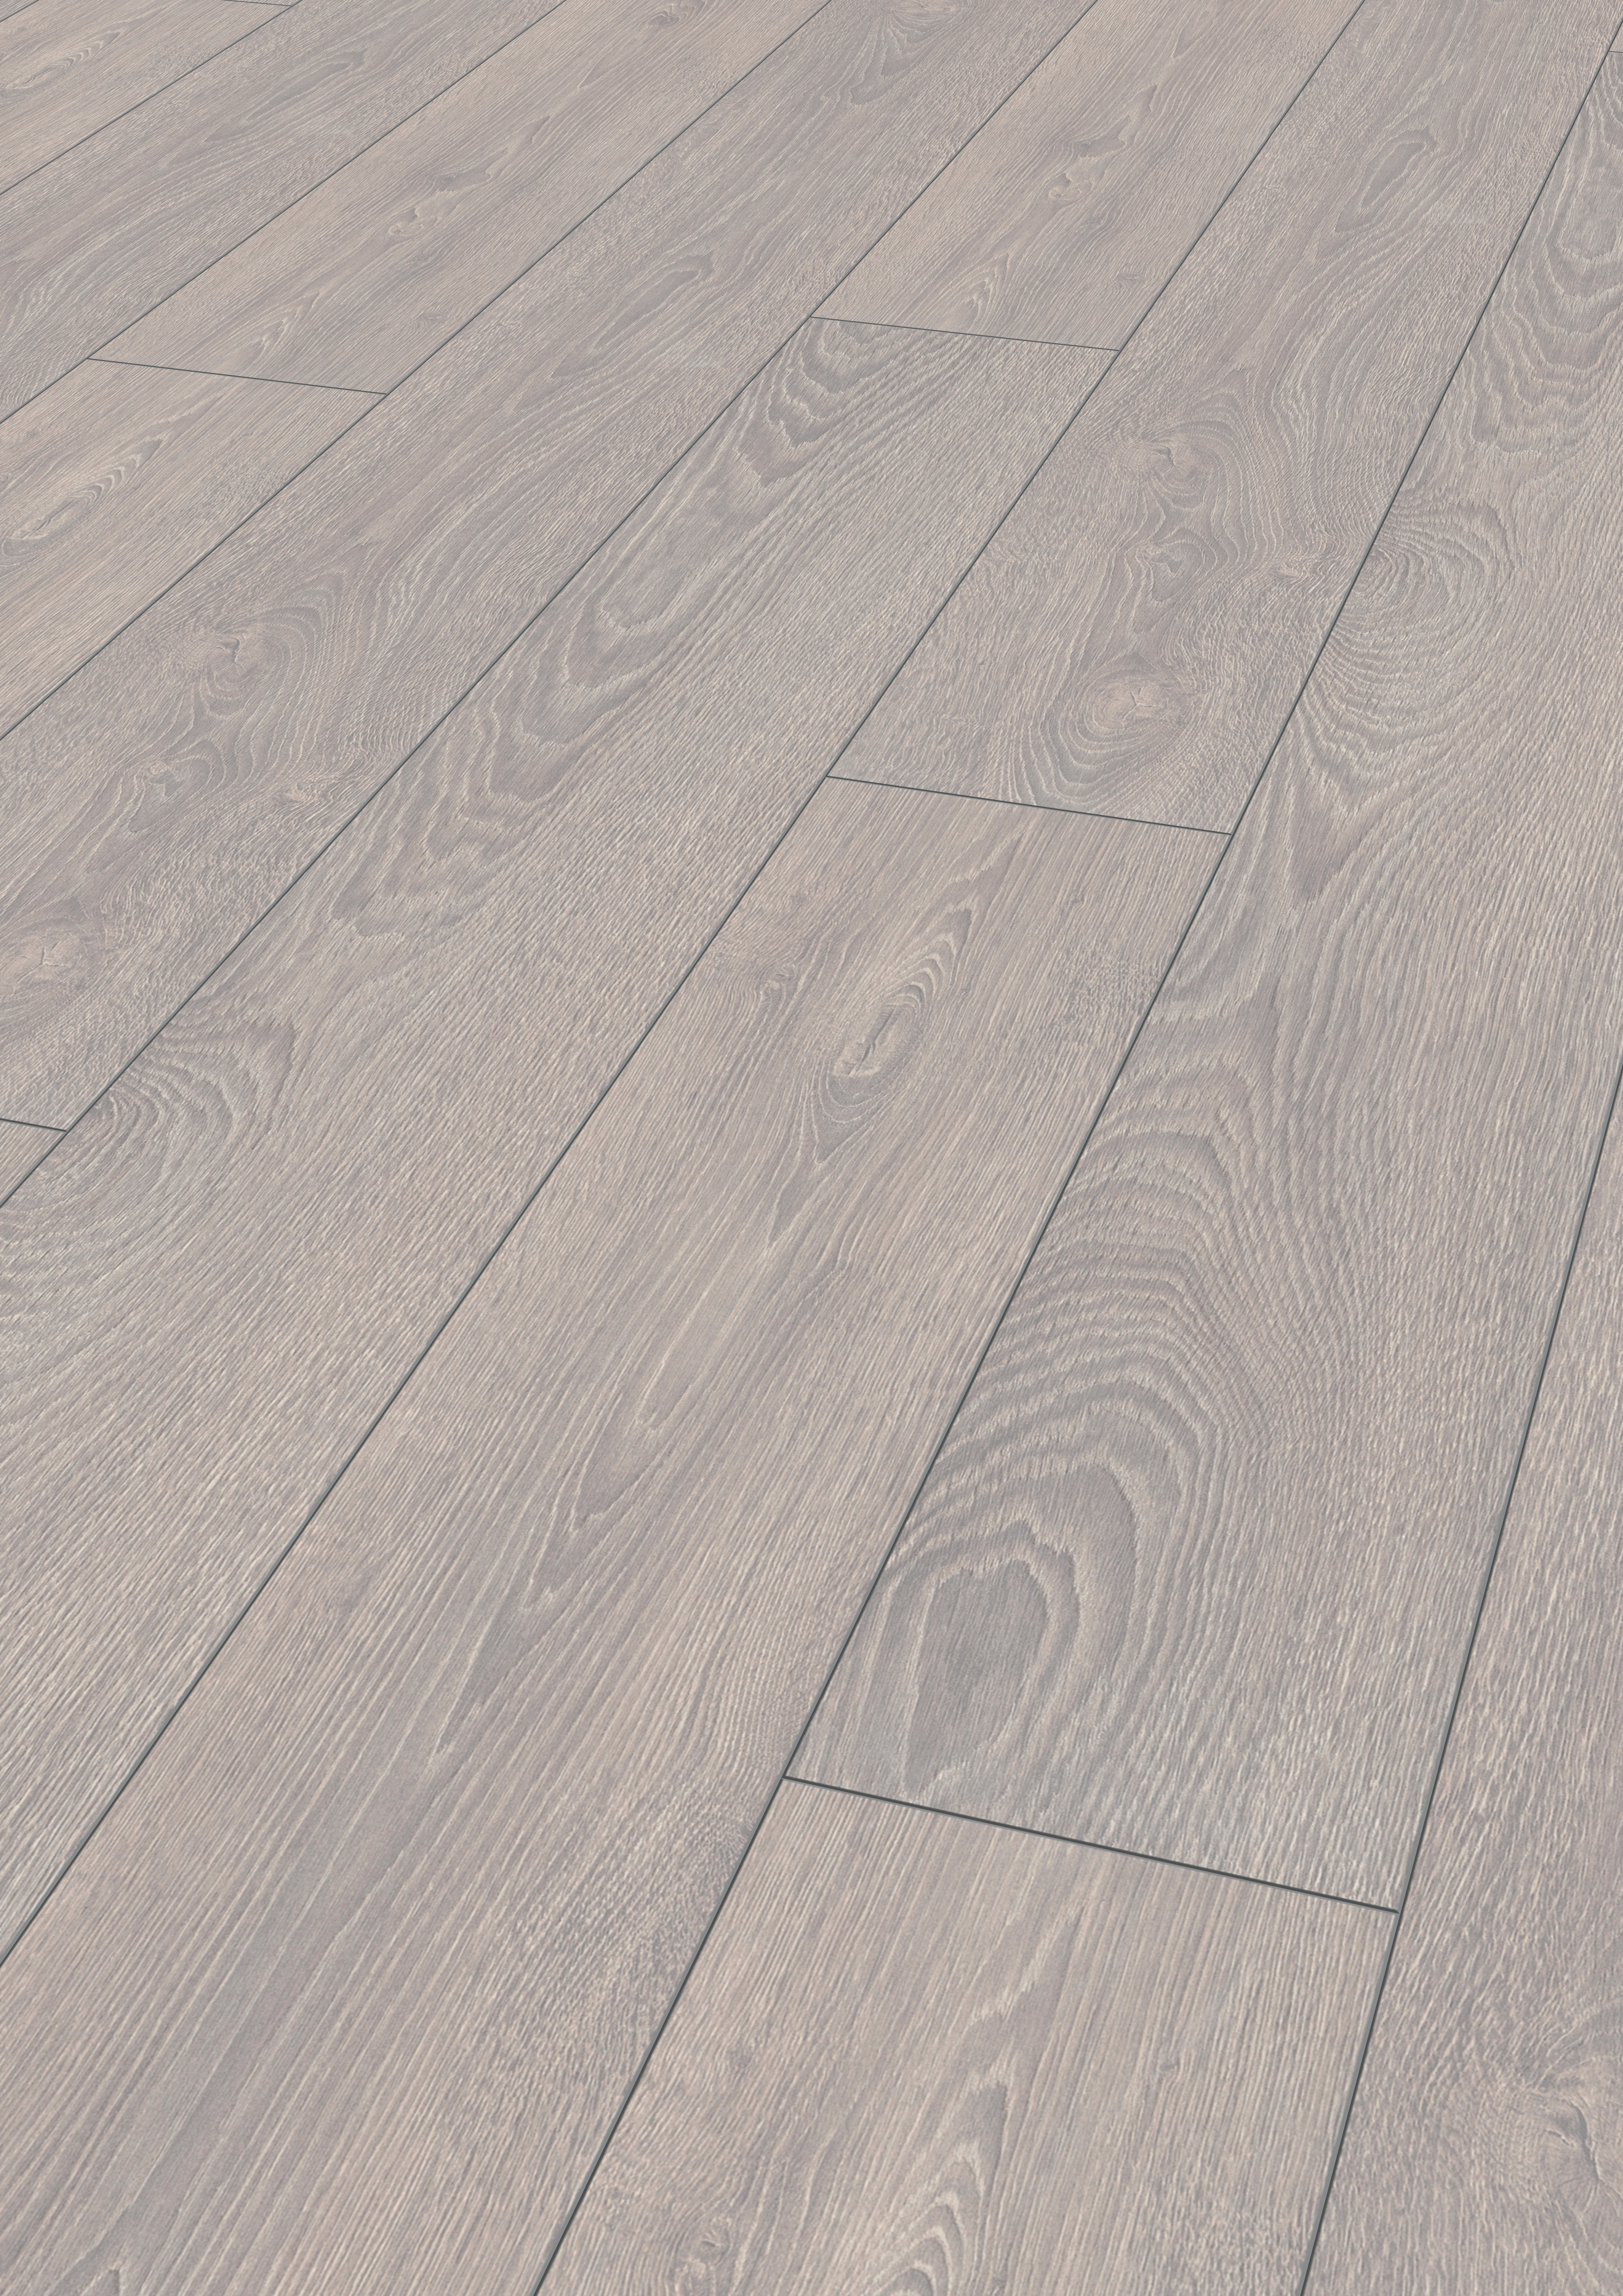 Hardwood Flooring Outlet toronto Of Mammut Laminate Flooring In Country House Plank Style Kronotex Pertaining to Download Picture